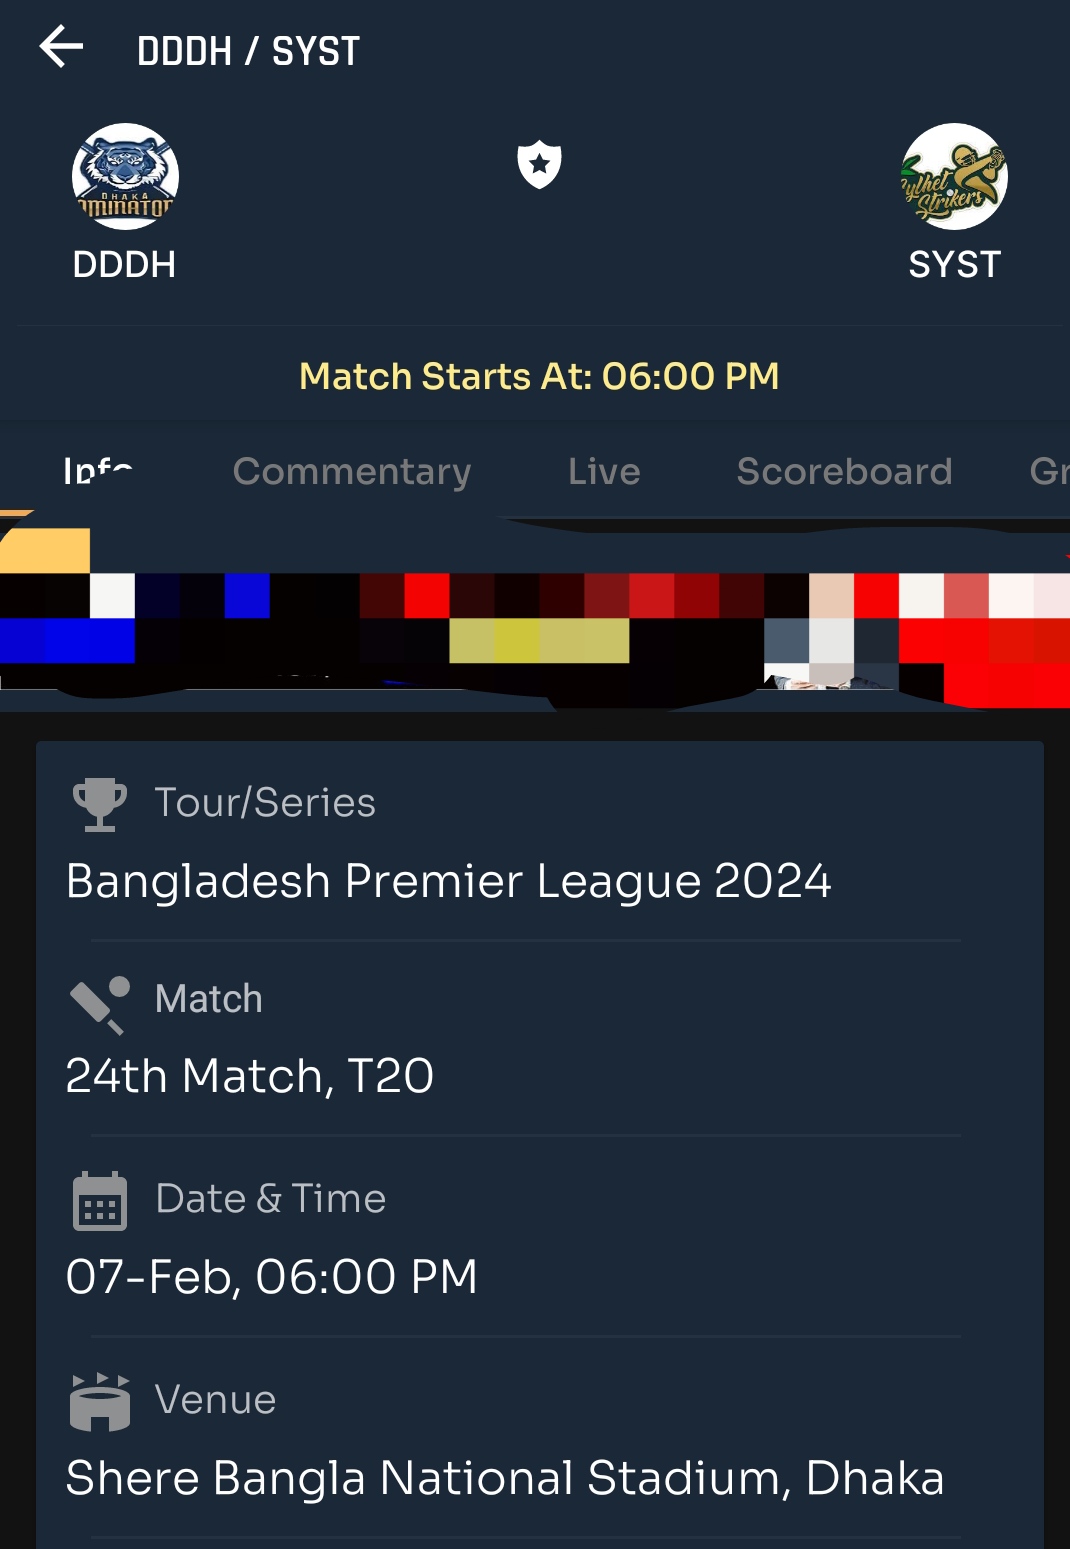 Today BPL Prediction |Match Number 23 |DDDH vs SYST| Toss and Match Analysis | Pitch & Weather Report